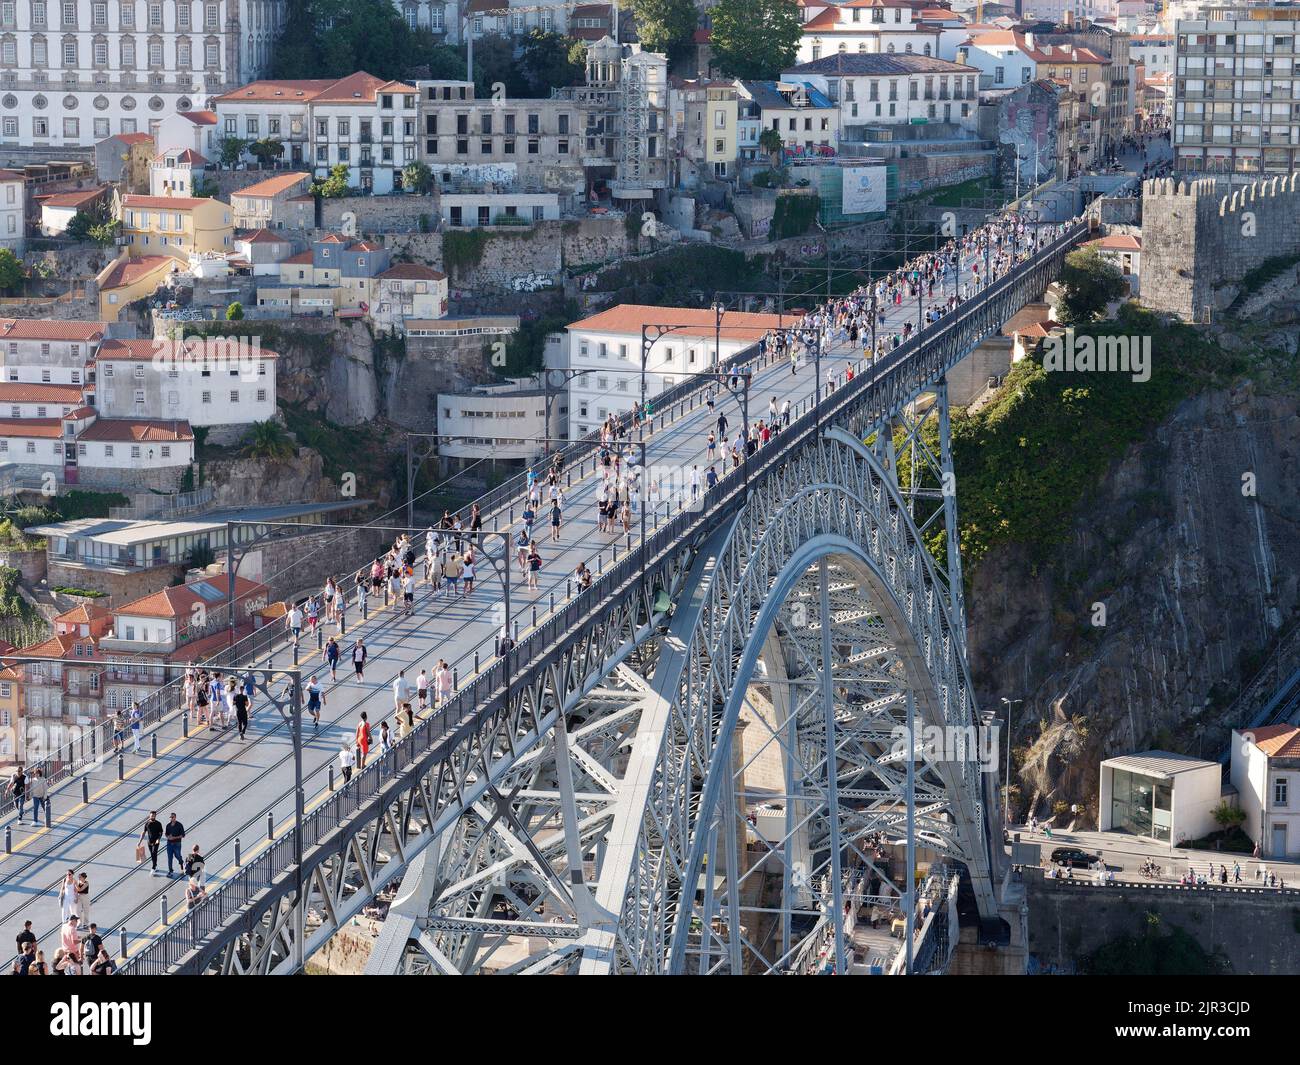 View over Luis I bridge In Porto, Portugal, with buildings behind. People walk along the bridge which is also used by the metro train. Stock Photo